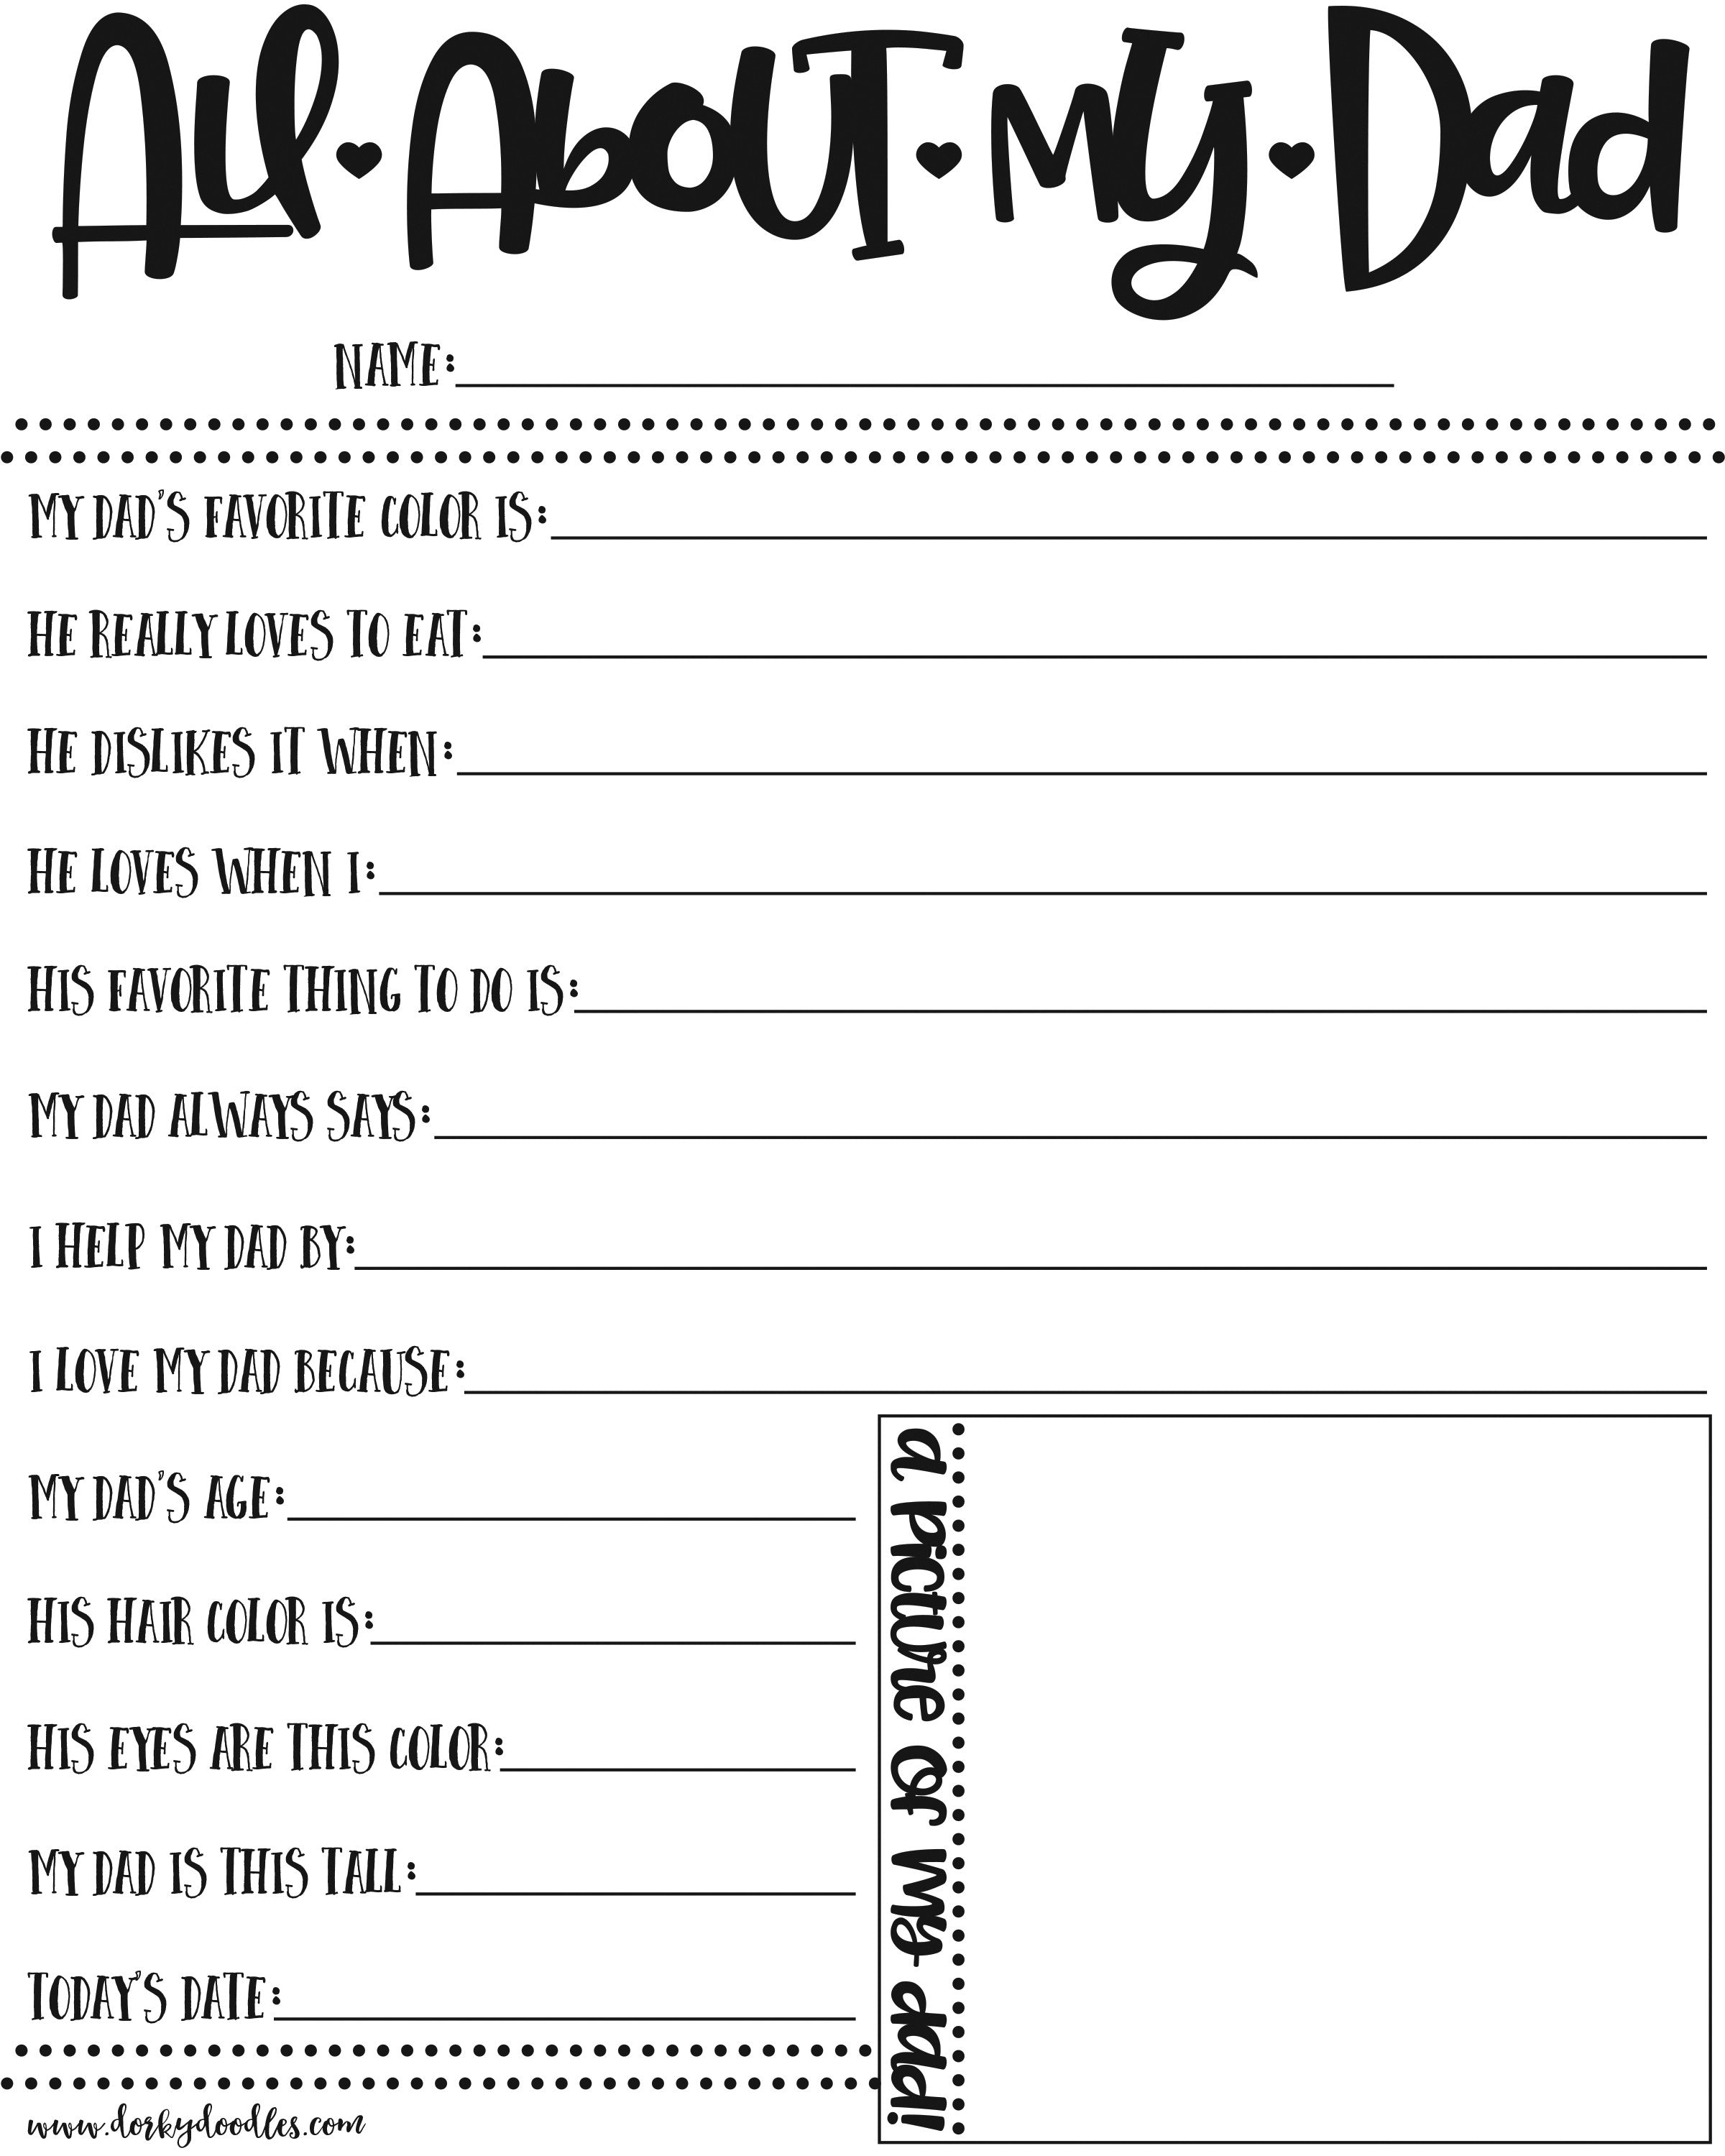 free-fathers-day-questionnaire-printables-free-printable-templates